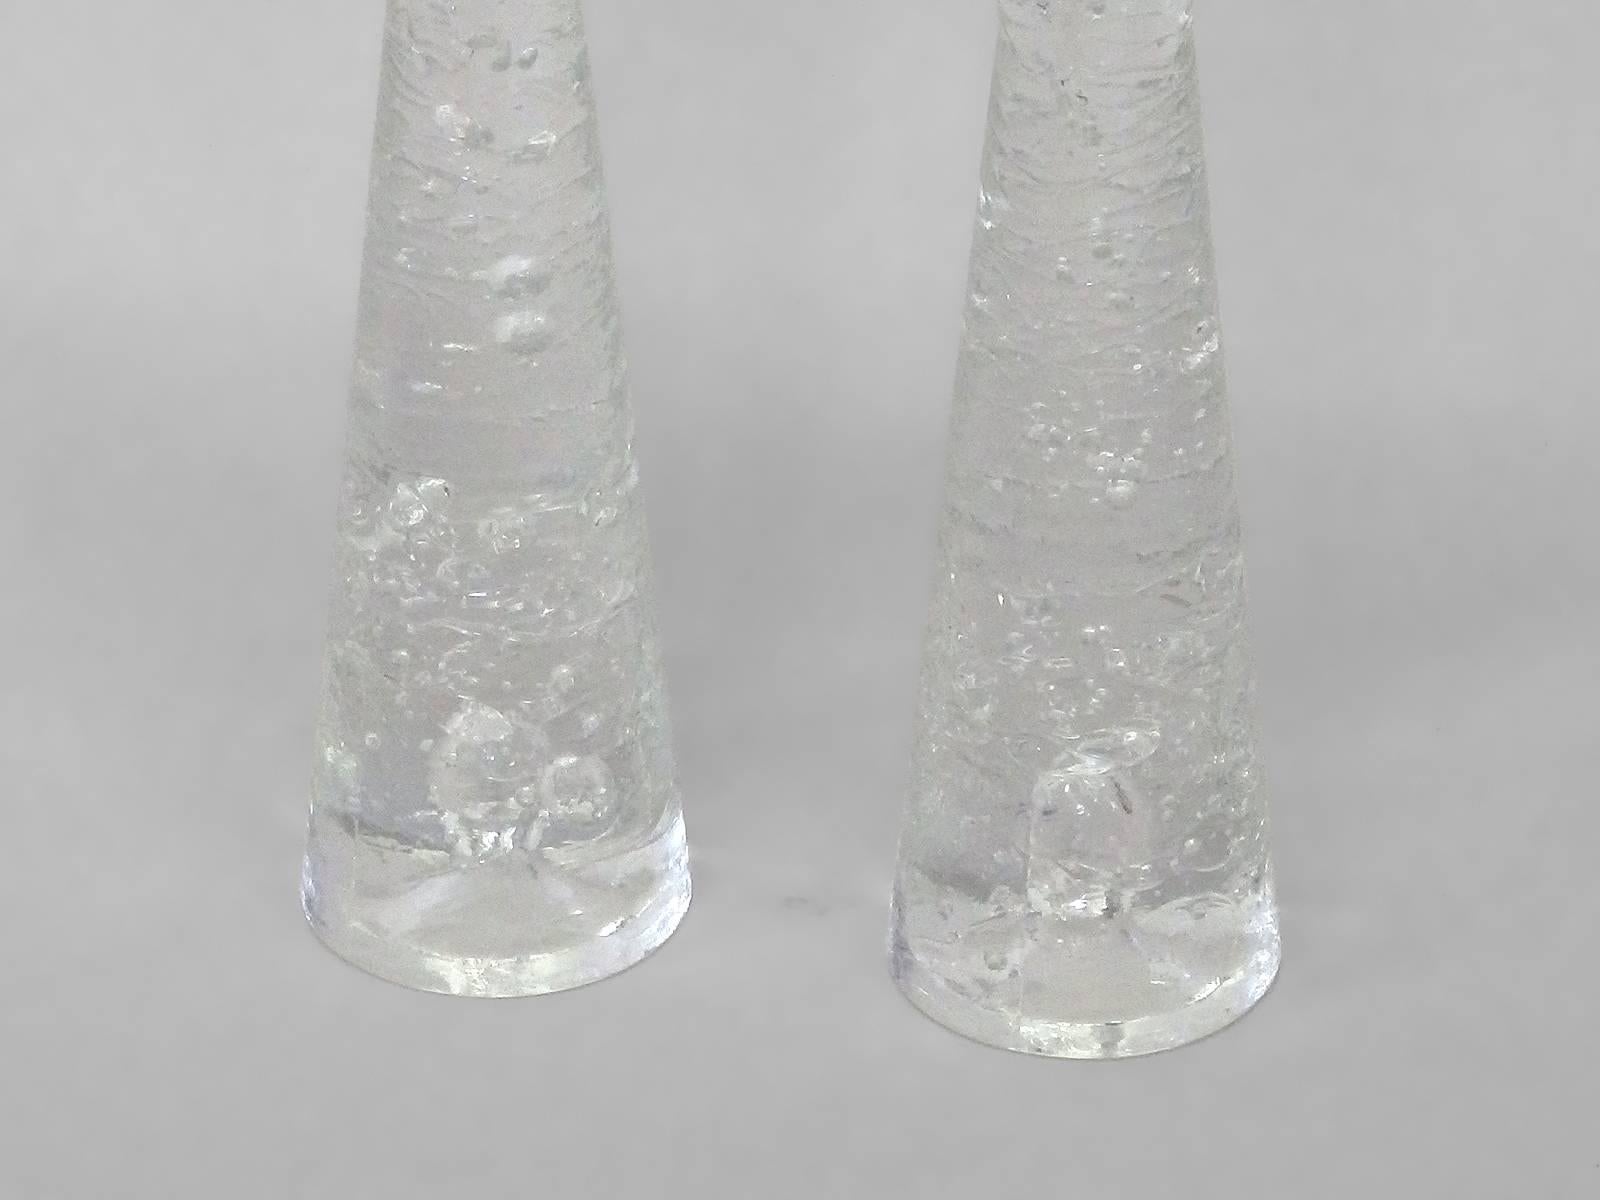 Pair of glass candlesticks designed by Timo Sarpaneva for Littala Finland . Solid clear glass in a pinched waist form with internal controlled bubble detail .